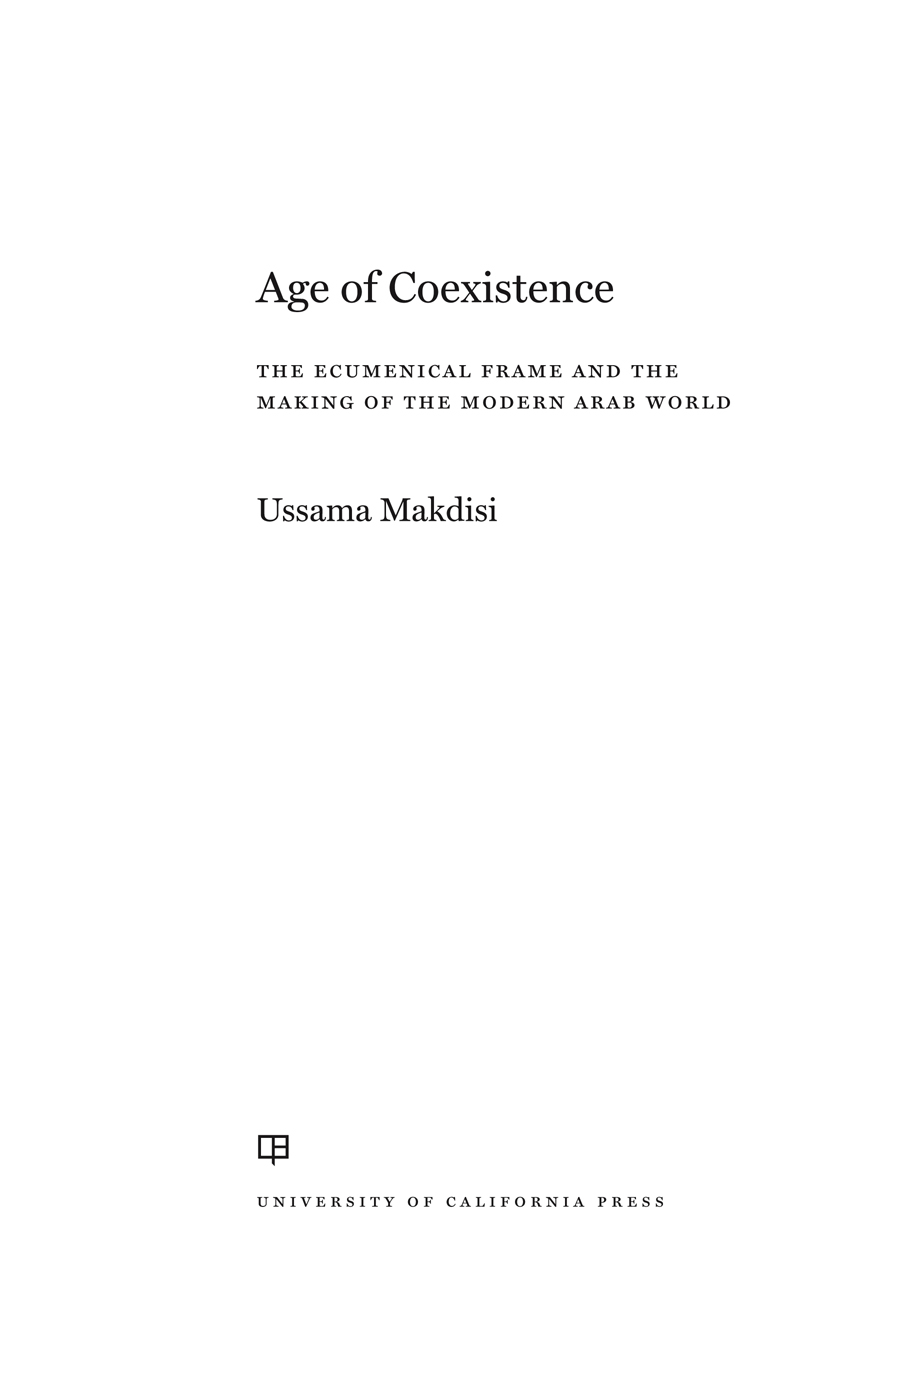 Age of Coexistence The publisher and the University of California Press - photo 1